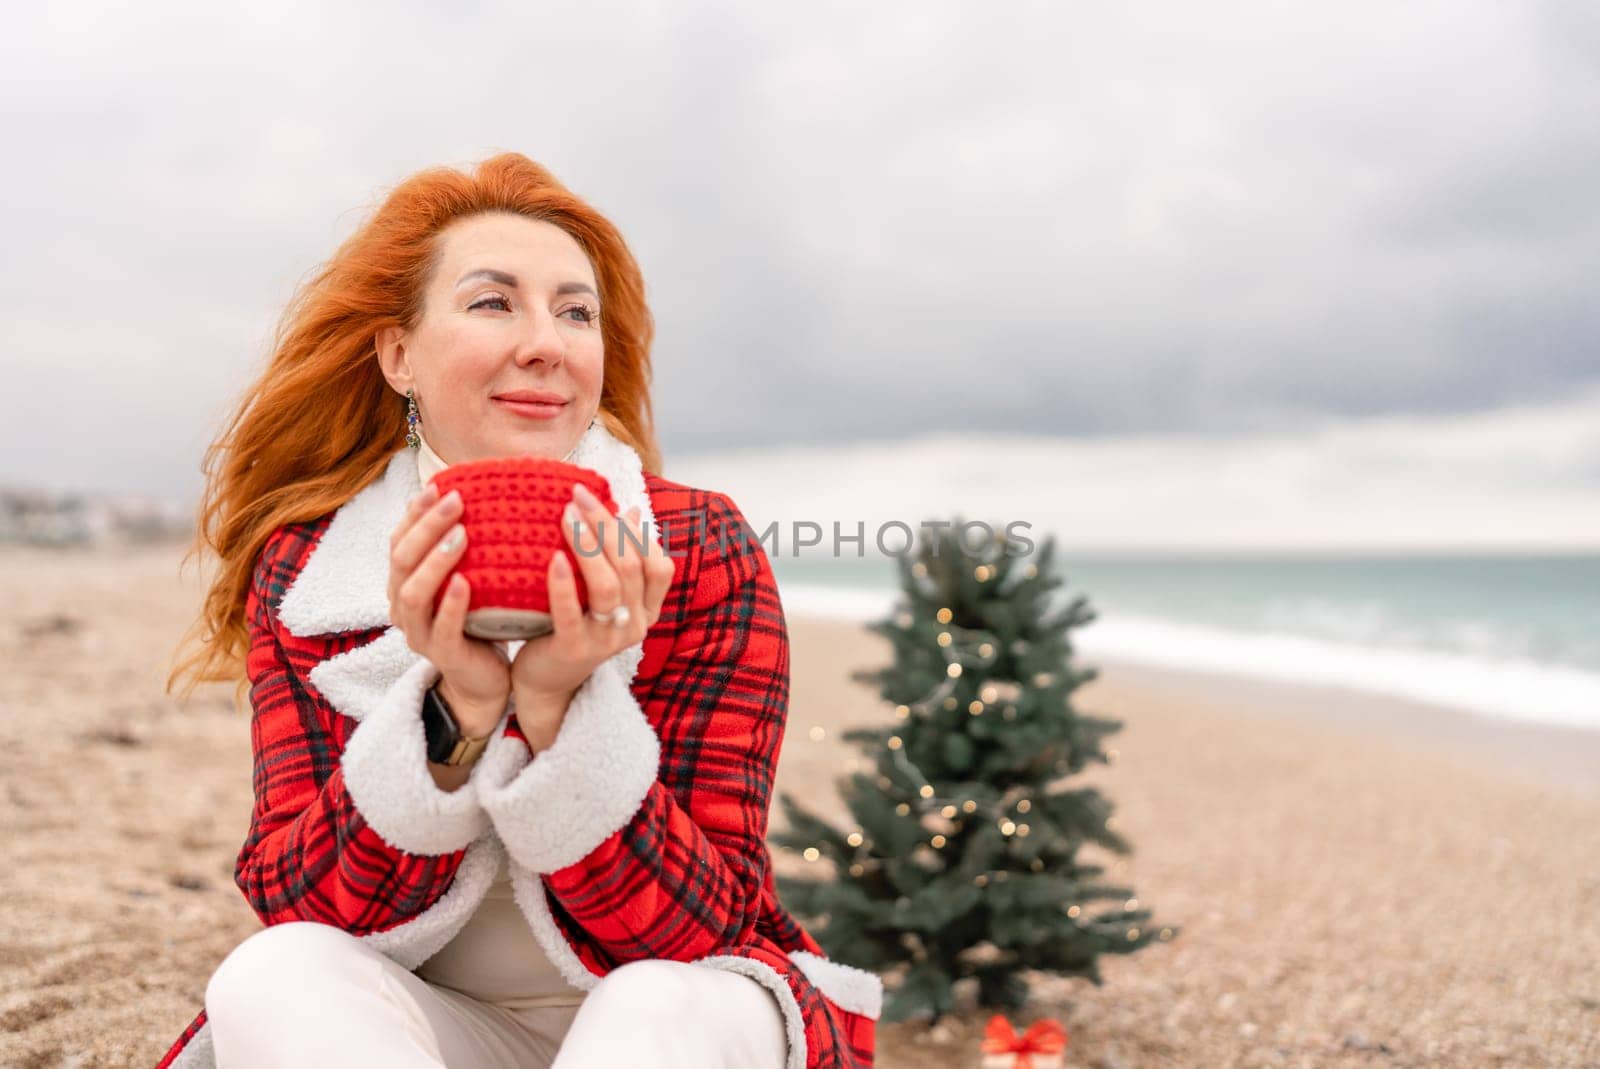 Lady in plaid shirt with a red mug in her hands enjoys beach with Christmas tree. Coastal area. Christmas, New Year holidays concep.